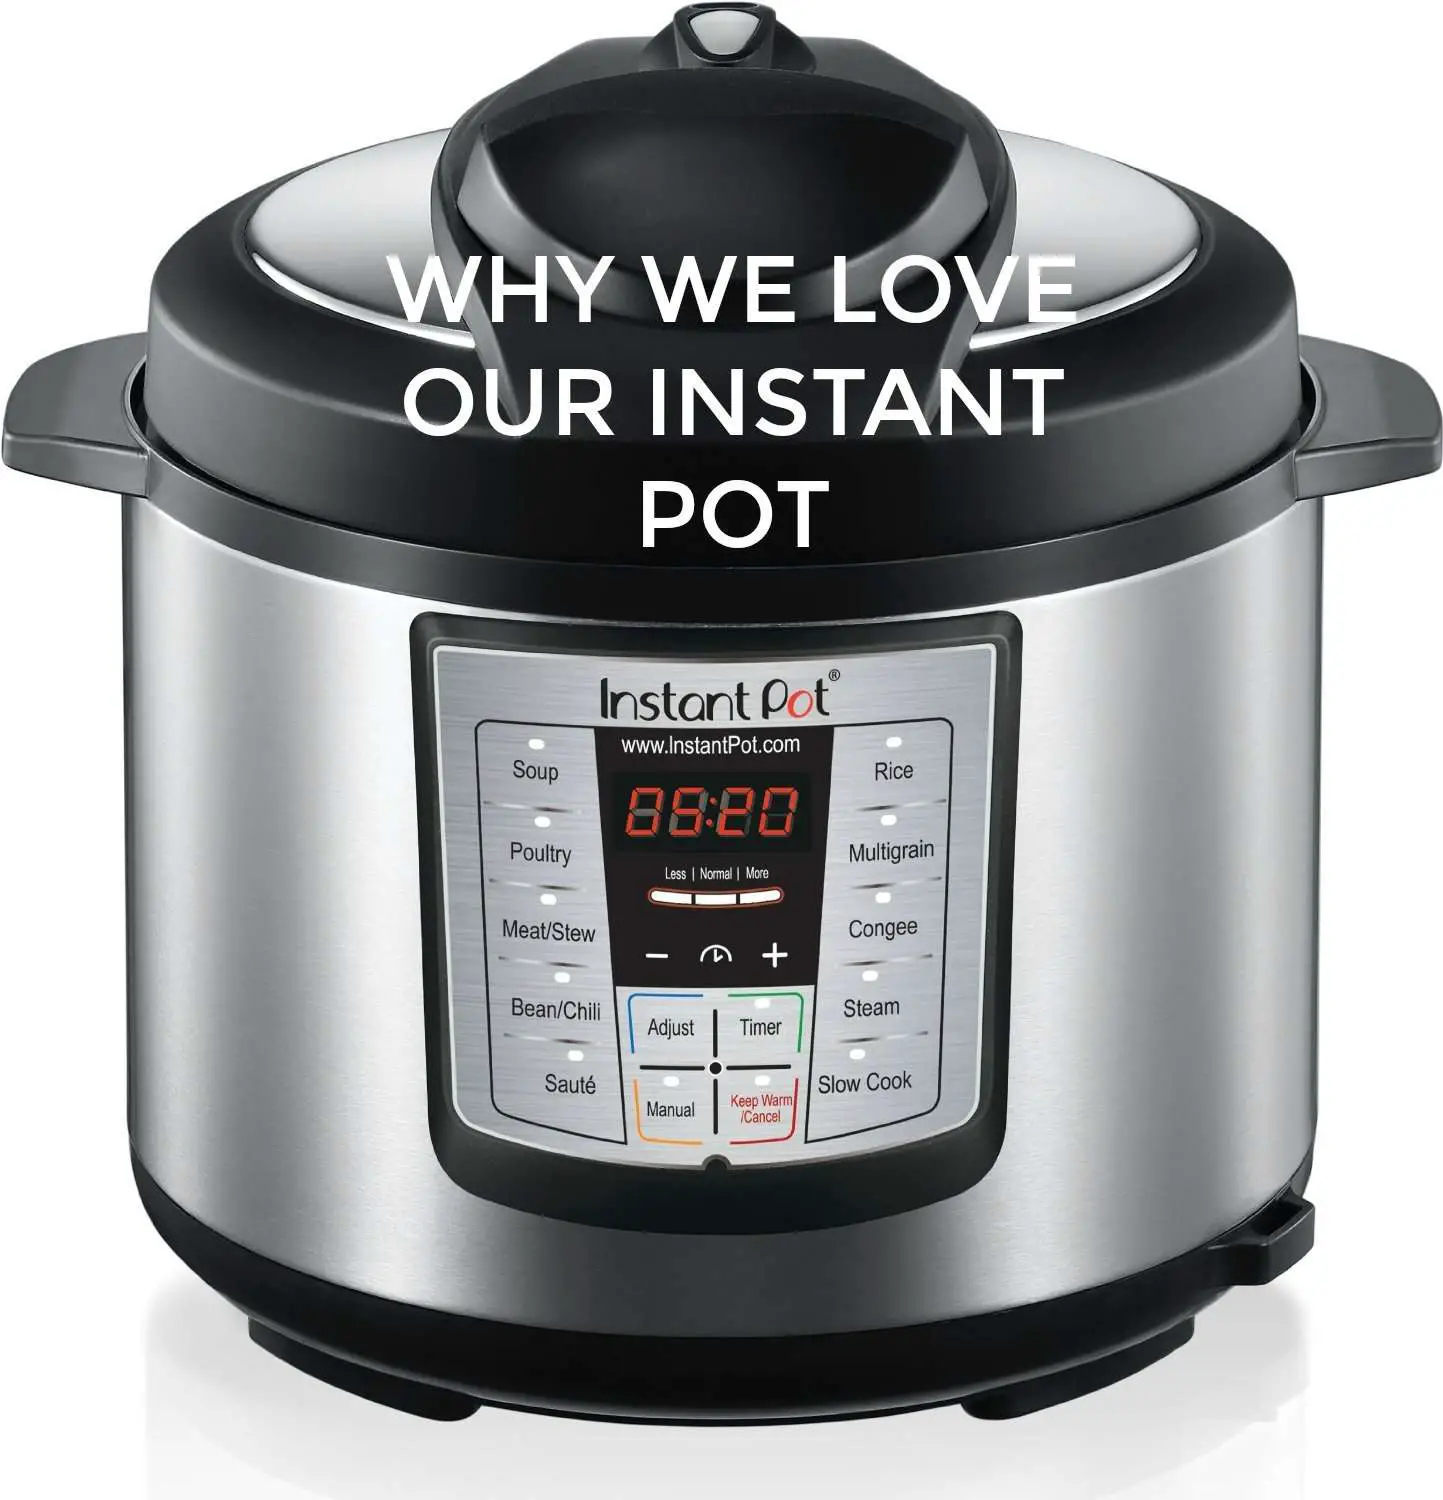 Instant Pot Information and an Instant Pot Cookbook Giveaway